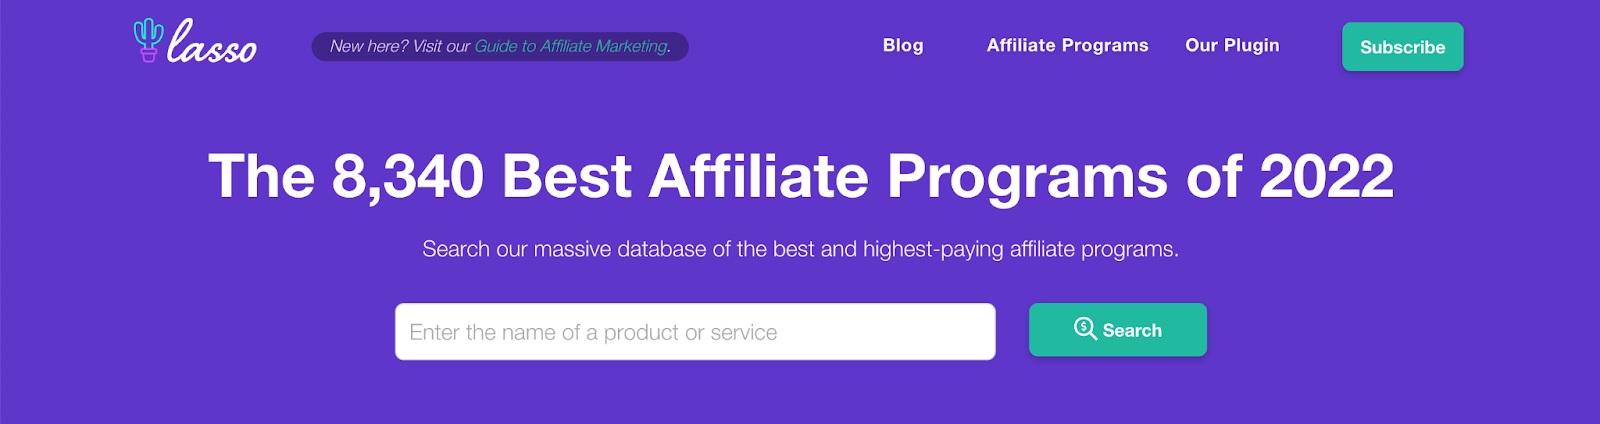 lasso home page database of affiliate programs